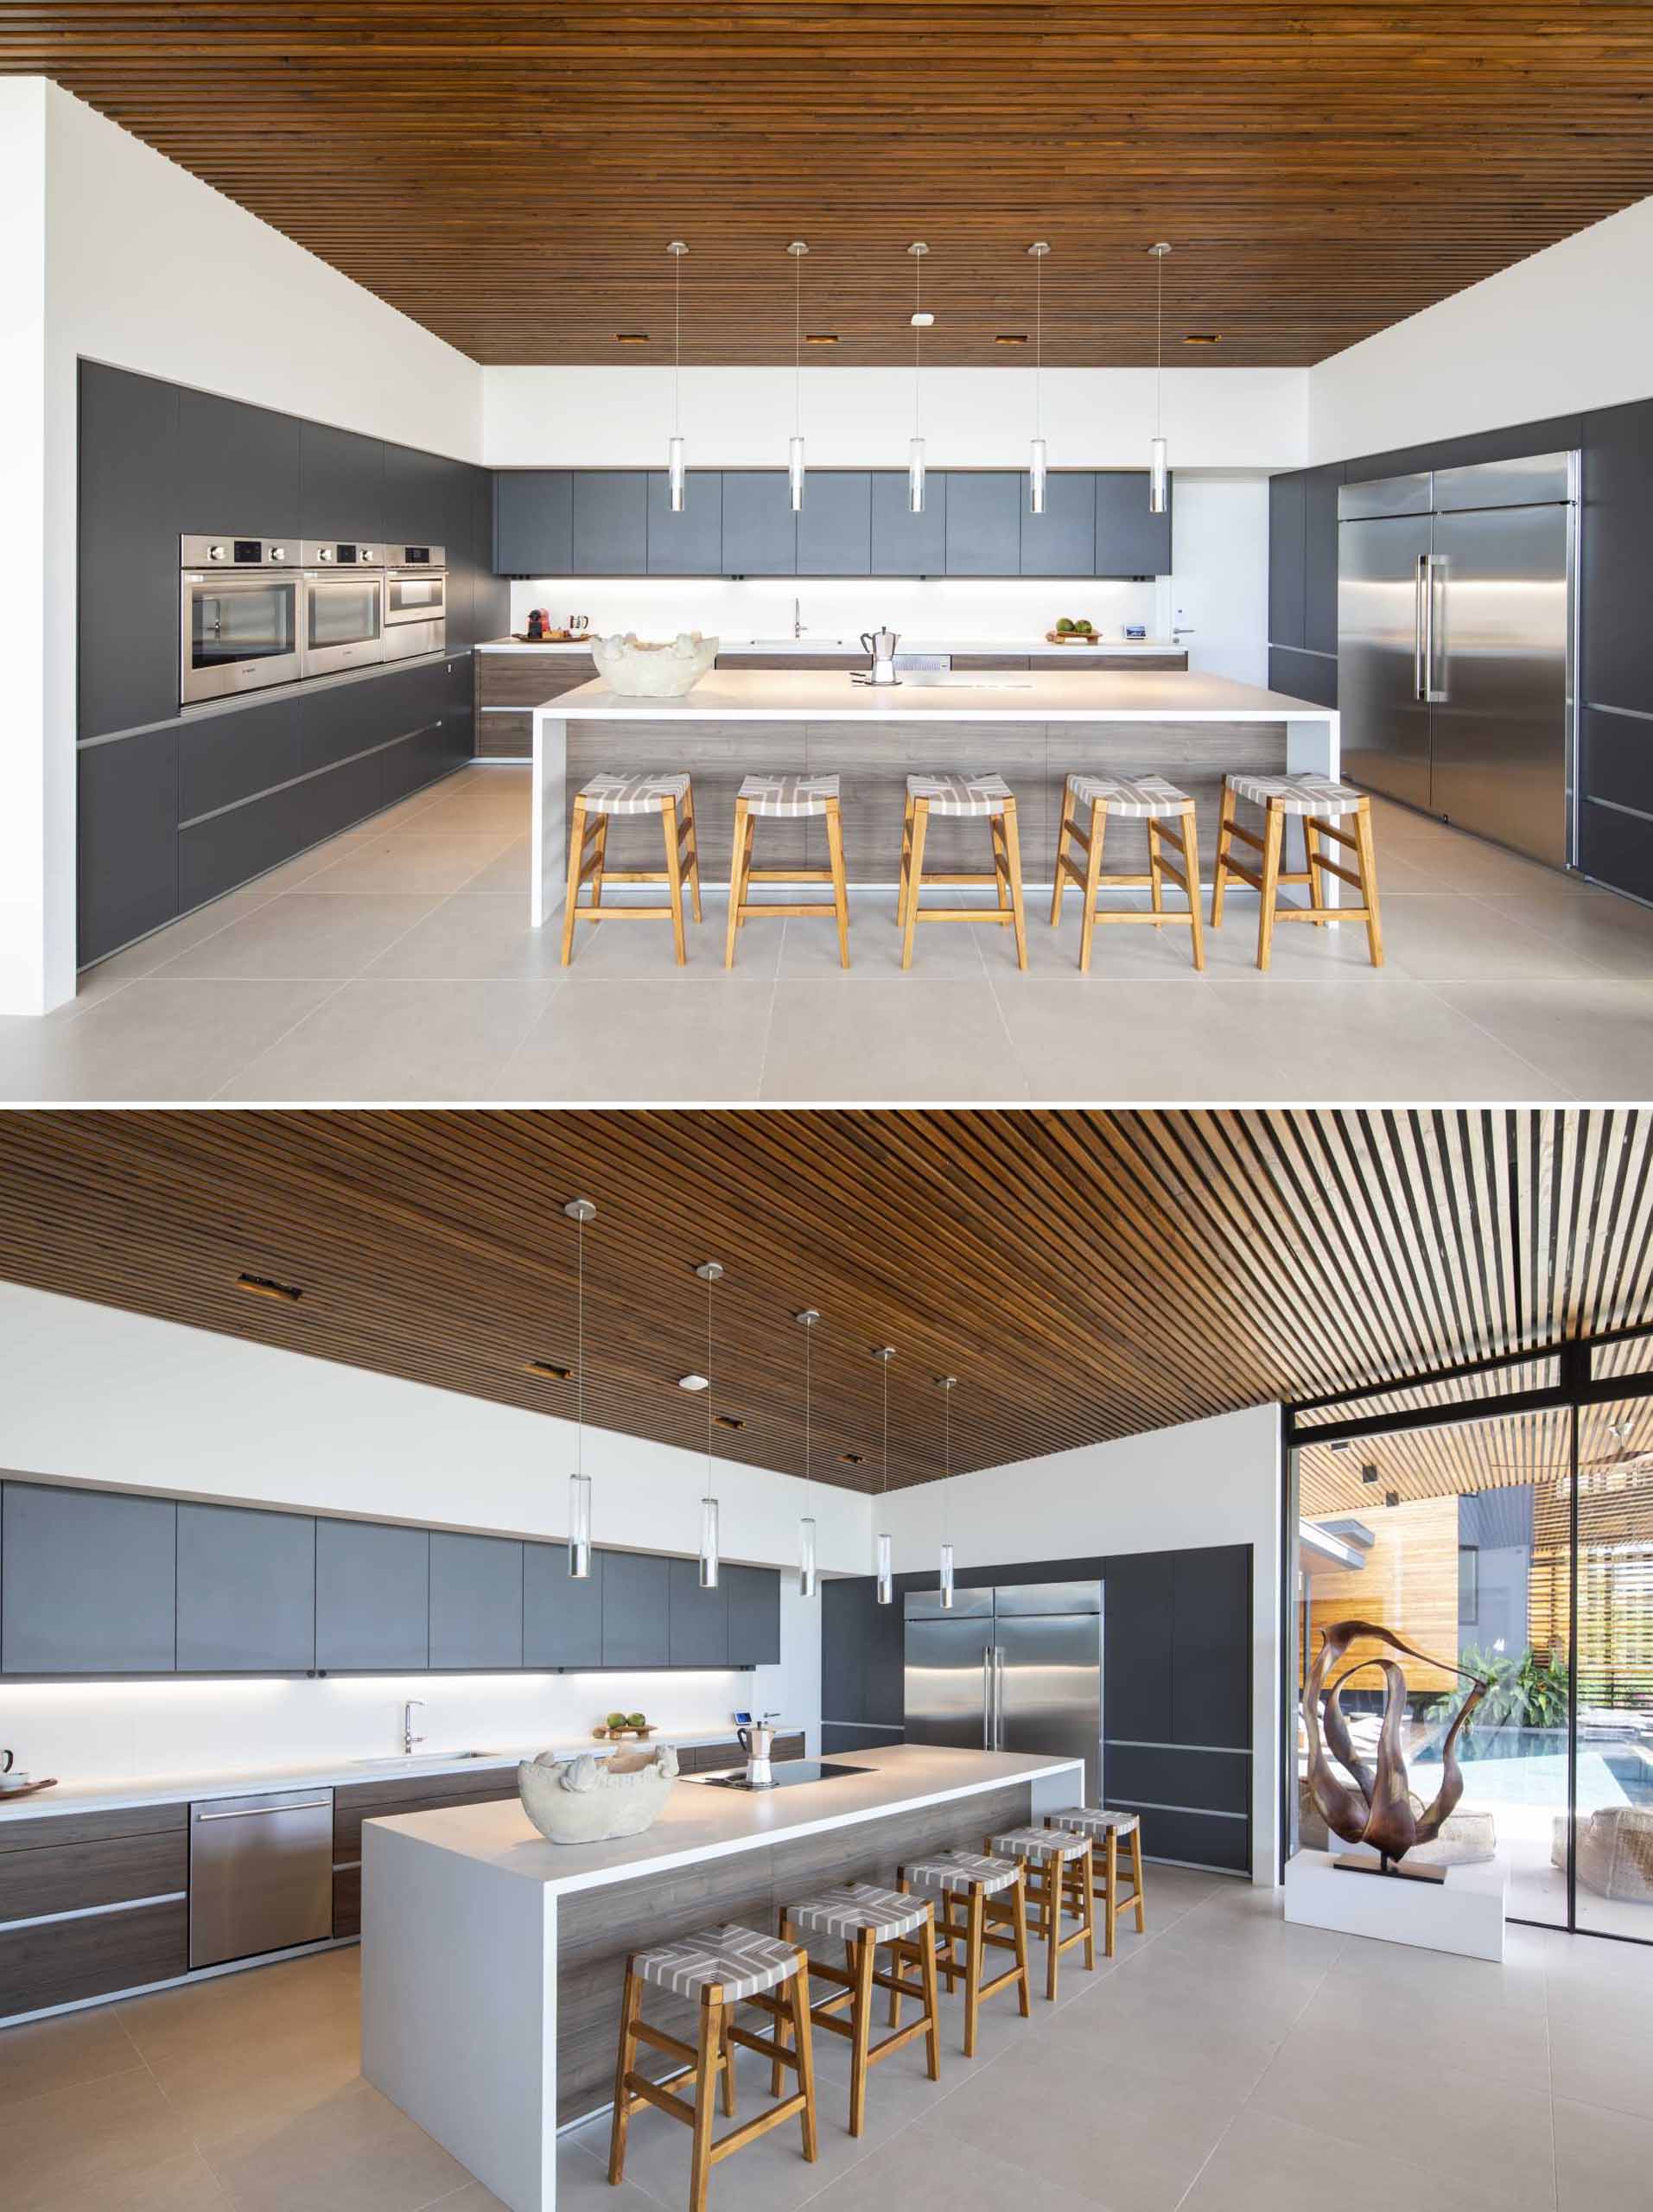 A modern kitchen with grey cabinets, white countertops, and large island.